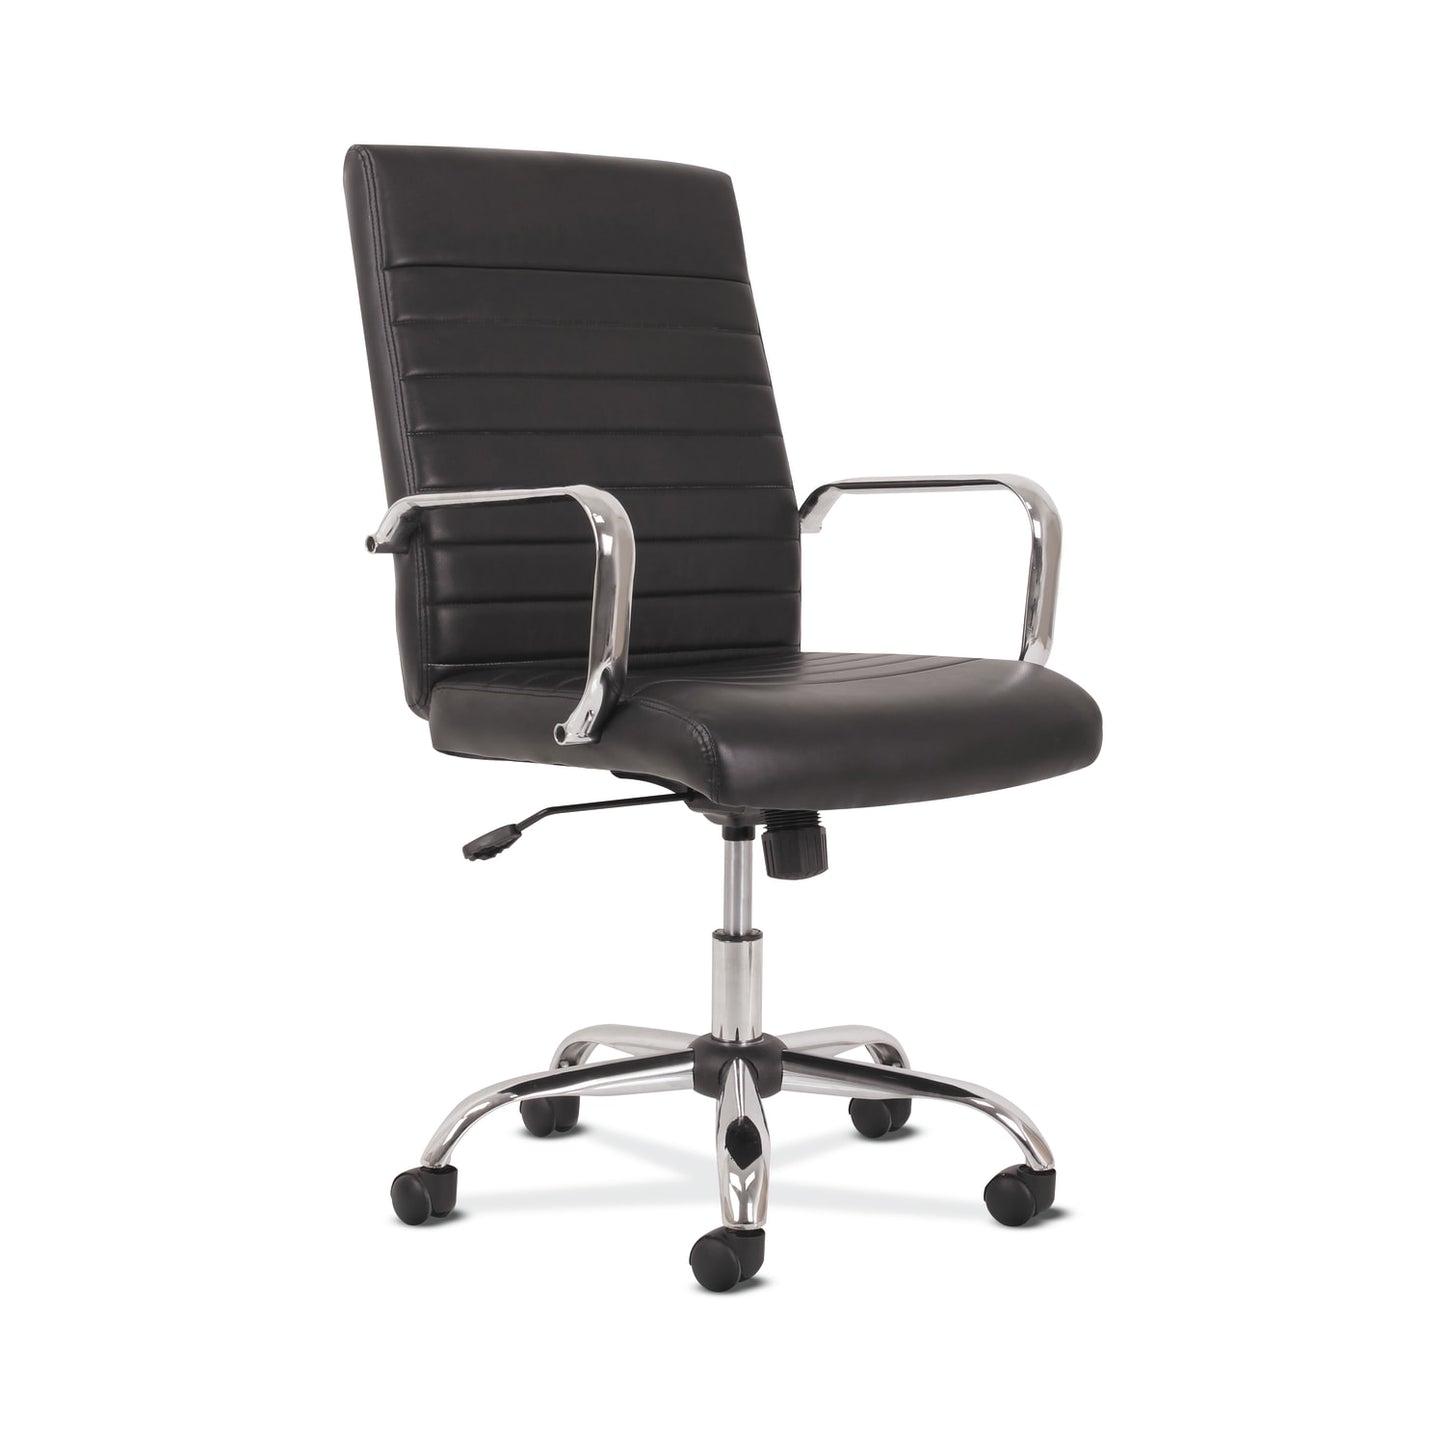 Sadie Executive Chair | Fixed Arms | Black Bonded Leather | Chrome Accents